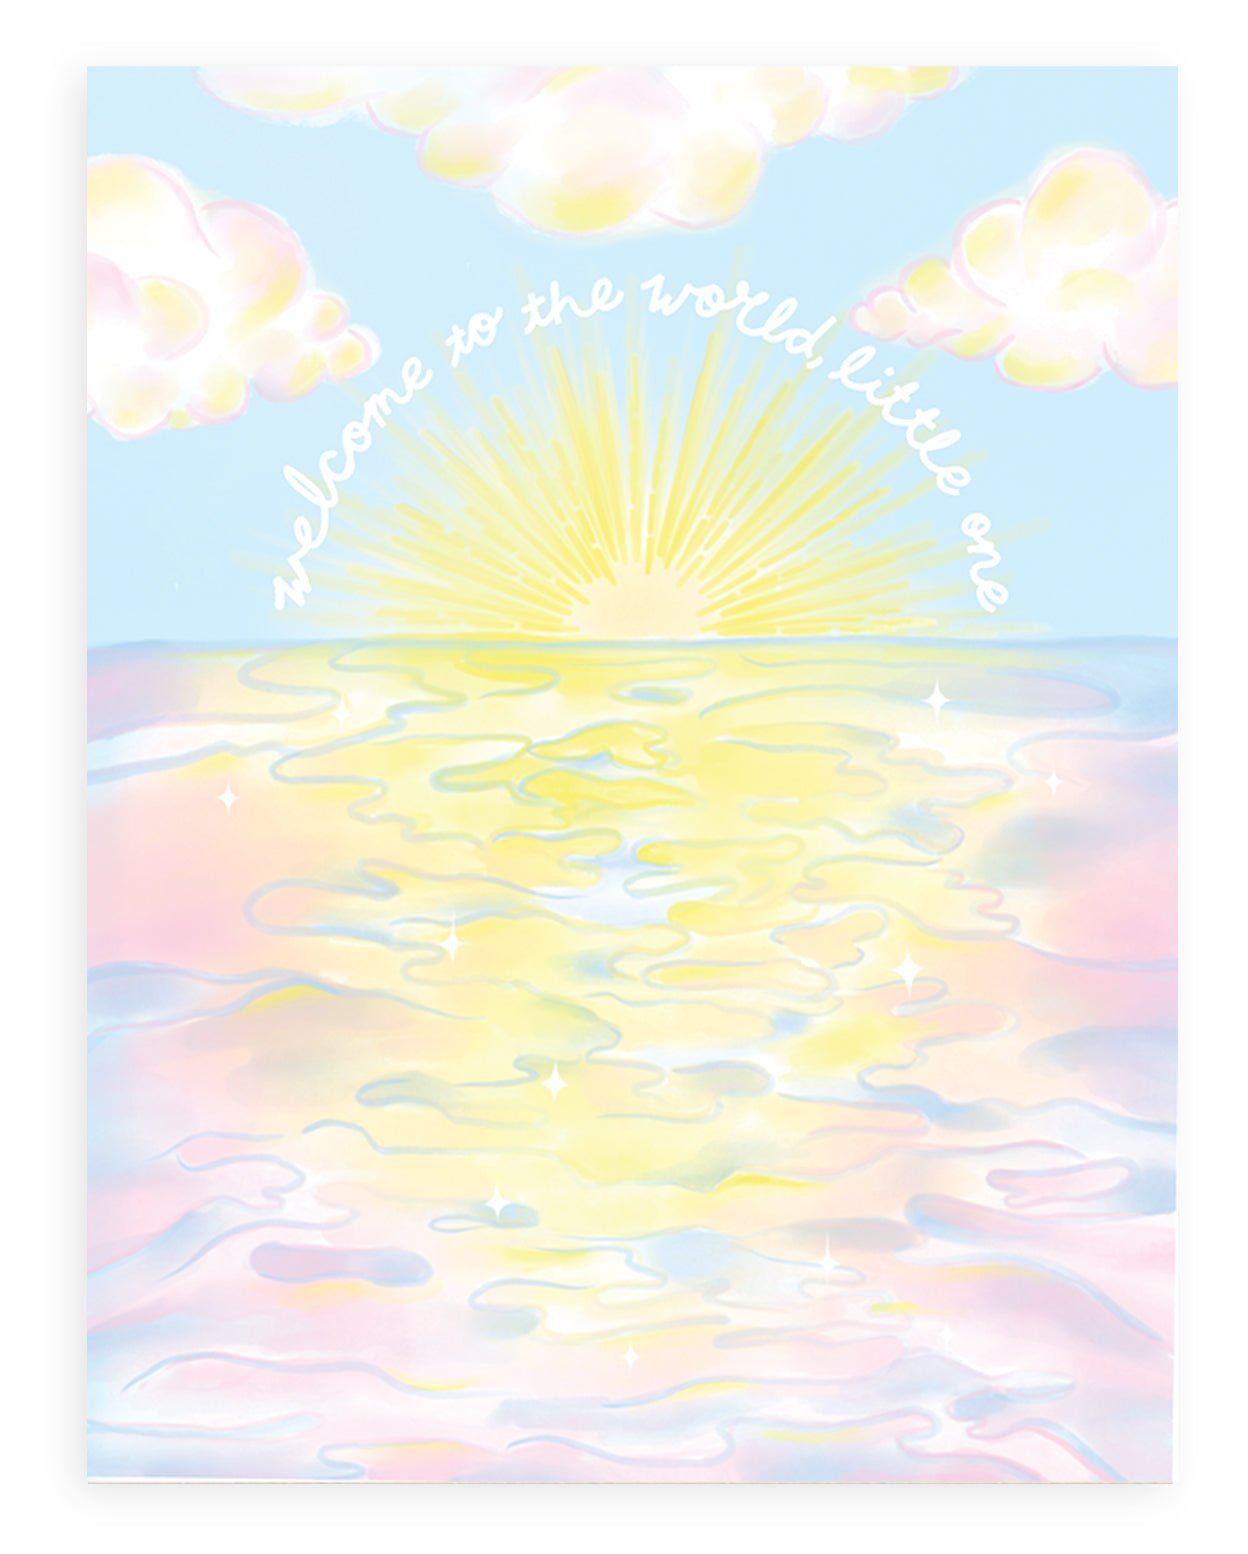 "Welcome To The World Little One" printed in white cursive font bending around a sunset over the ocean with a pink and blue cloudy landscape design printed on cardstock against a white background.